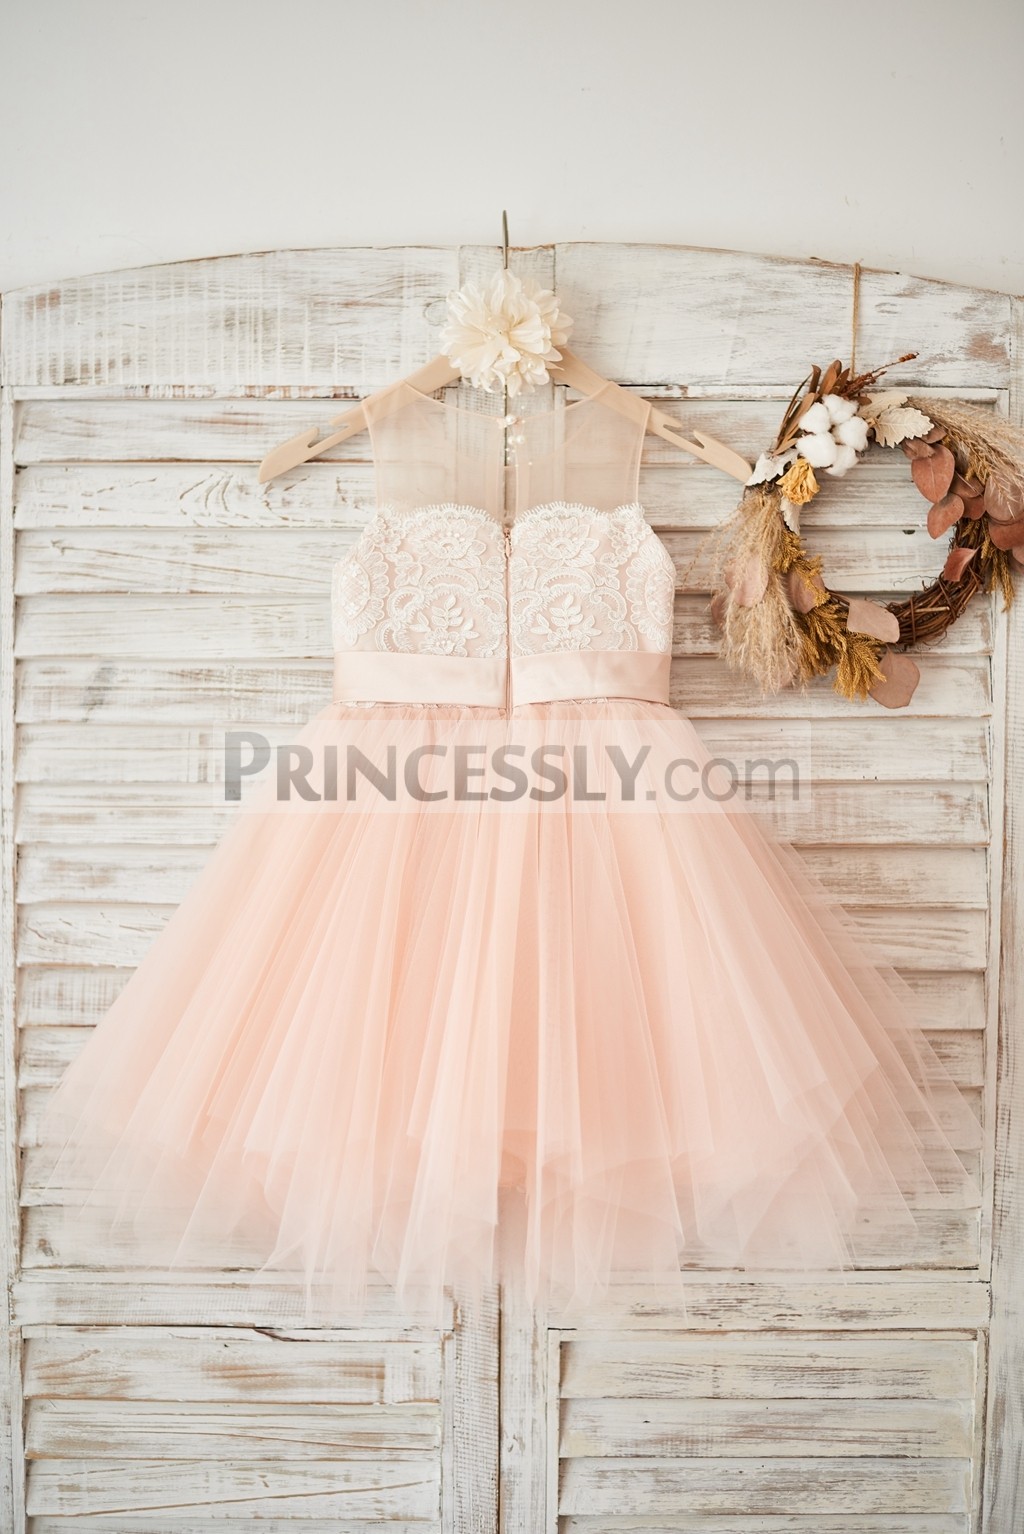 Ivory lace peach pink tulle wedding baby girl dress w/ uneven skirt hem